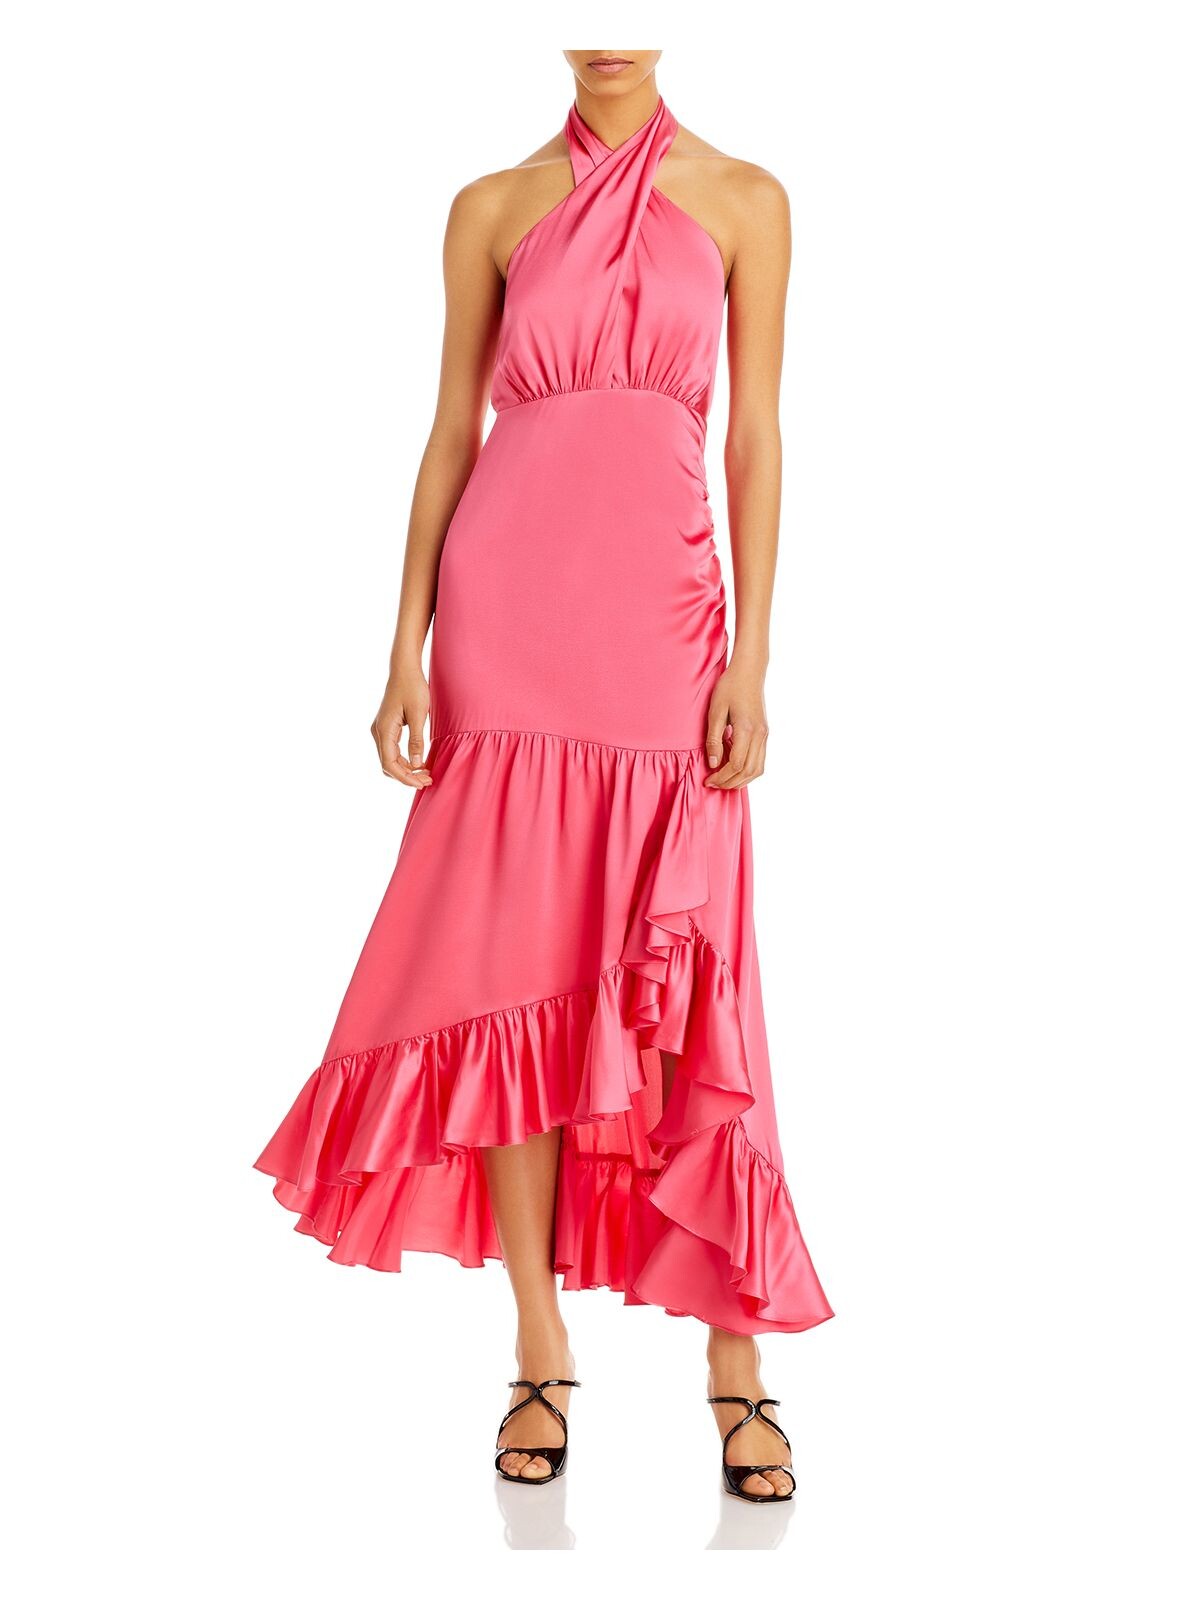 CINQ A SEPT Womens Pink Zippered Ruffled Pleated Unlined Tiered Sleeveless Halter Maxi Fit + Flare Dress 2